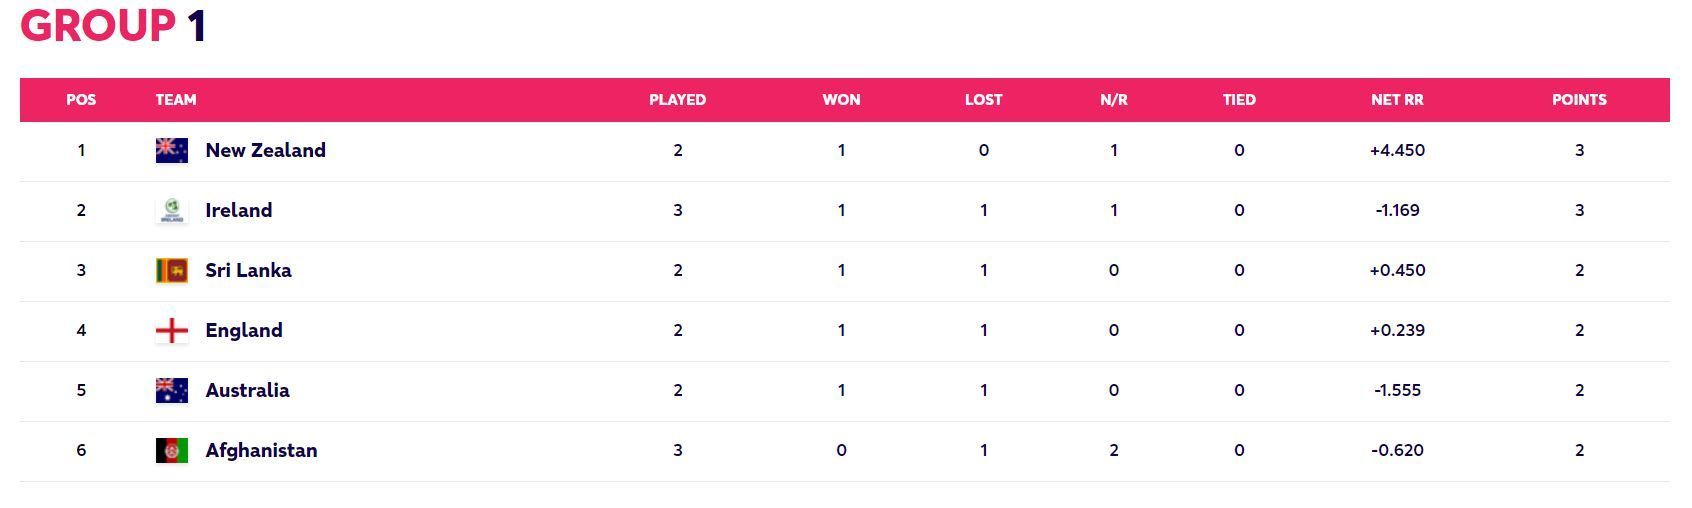 Updated Points Table after Match 25 (Image Courtesy: www.t20worldcup.com)